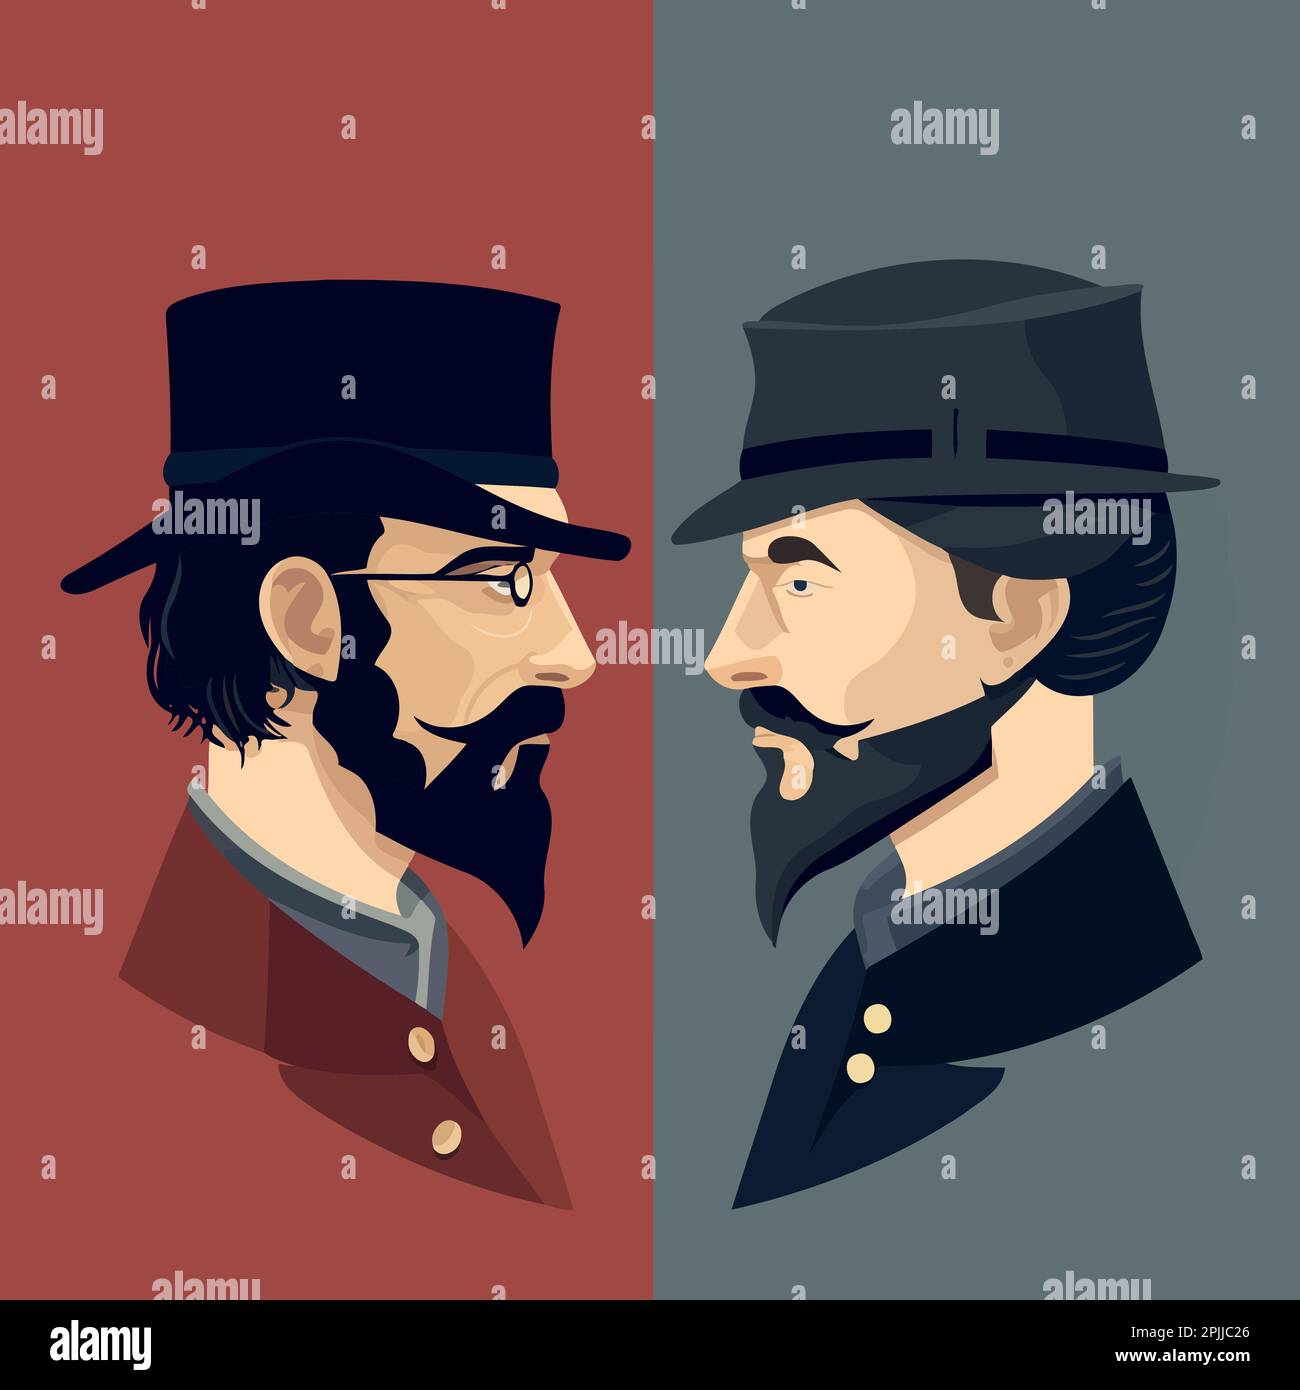 American civil war depicted by two men confronting each other Union vs Confederacy minimalist vector illustration Stock Vector